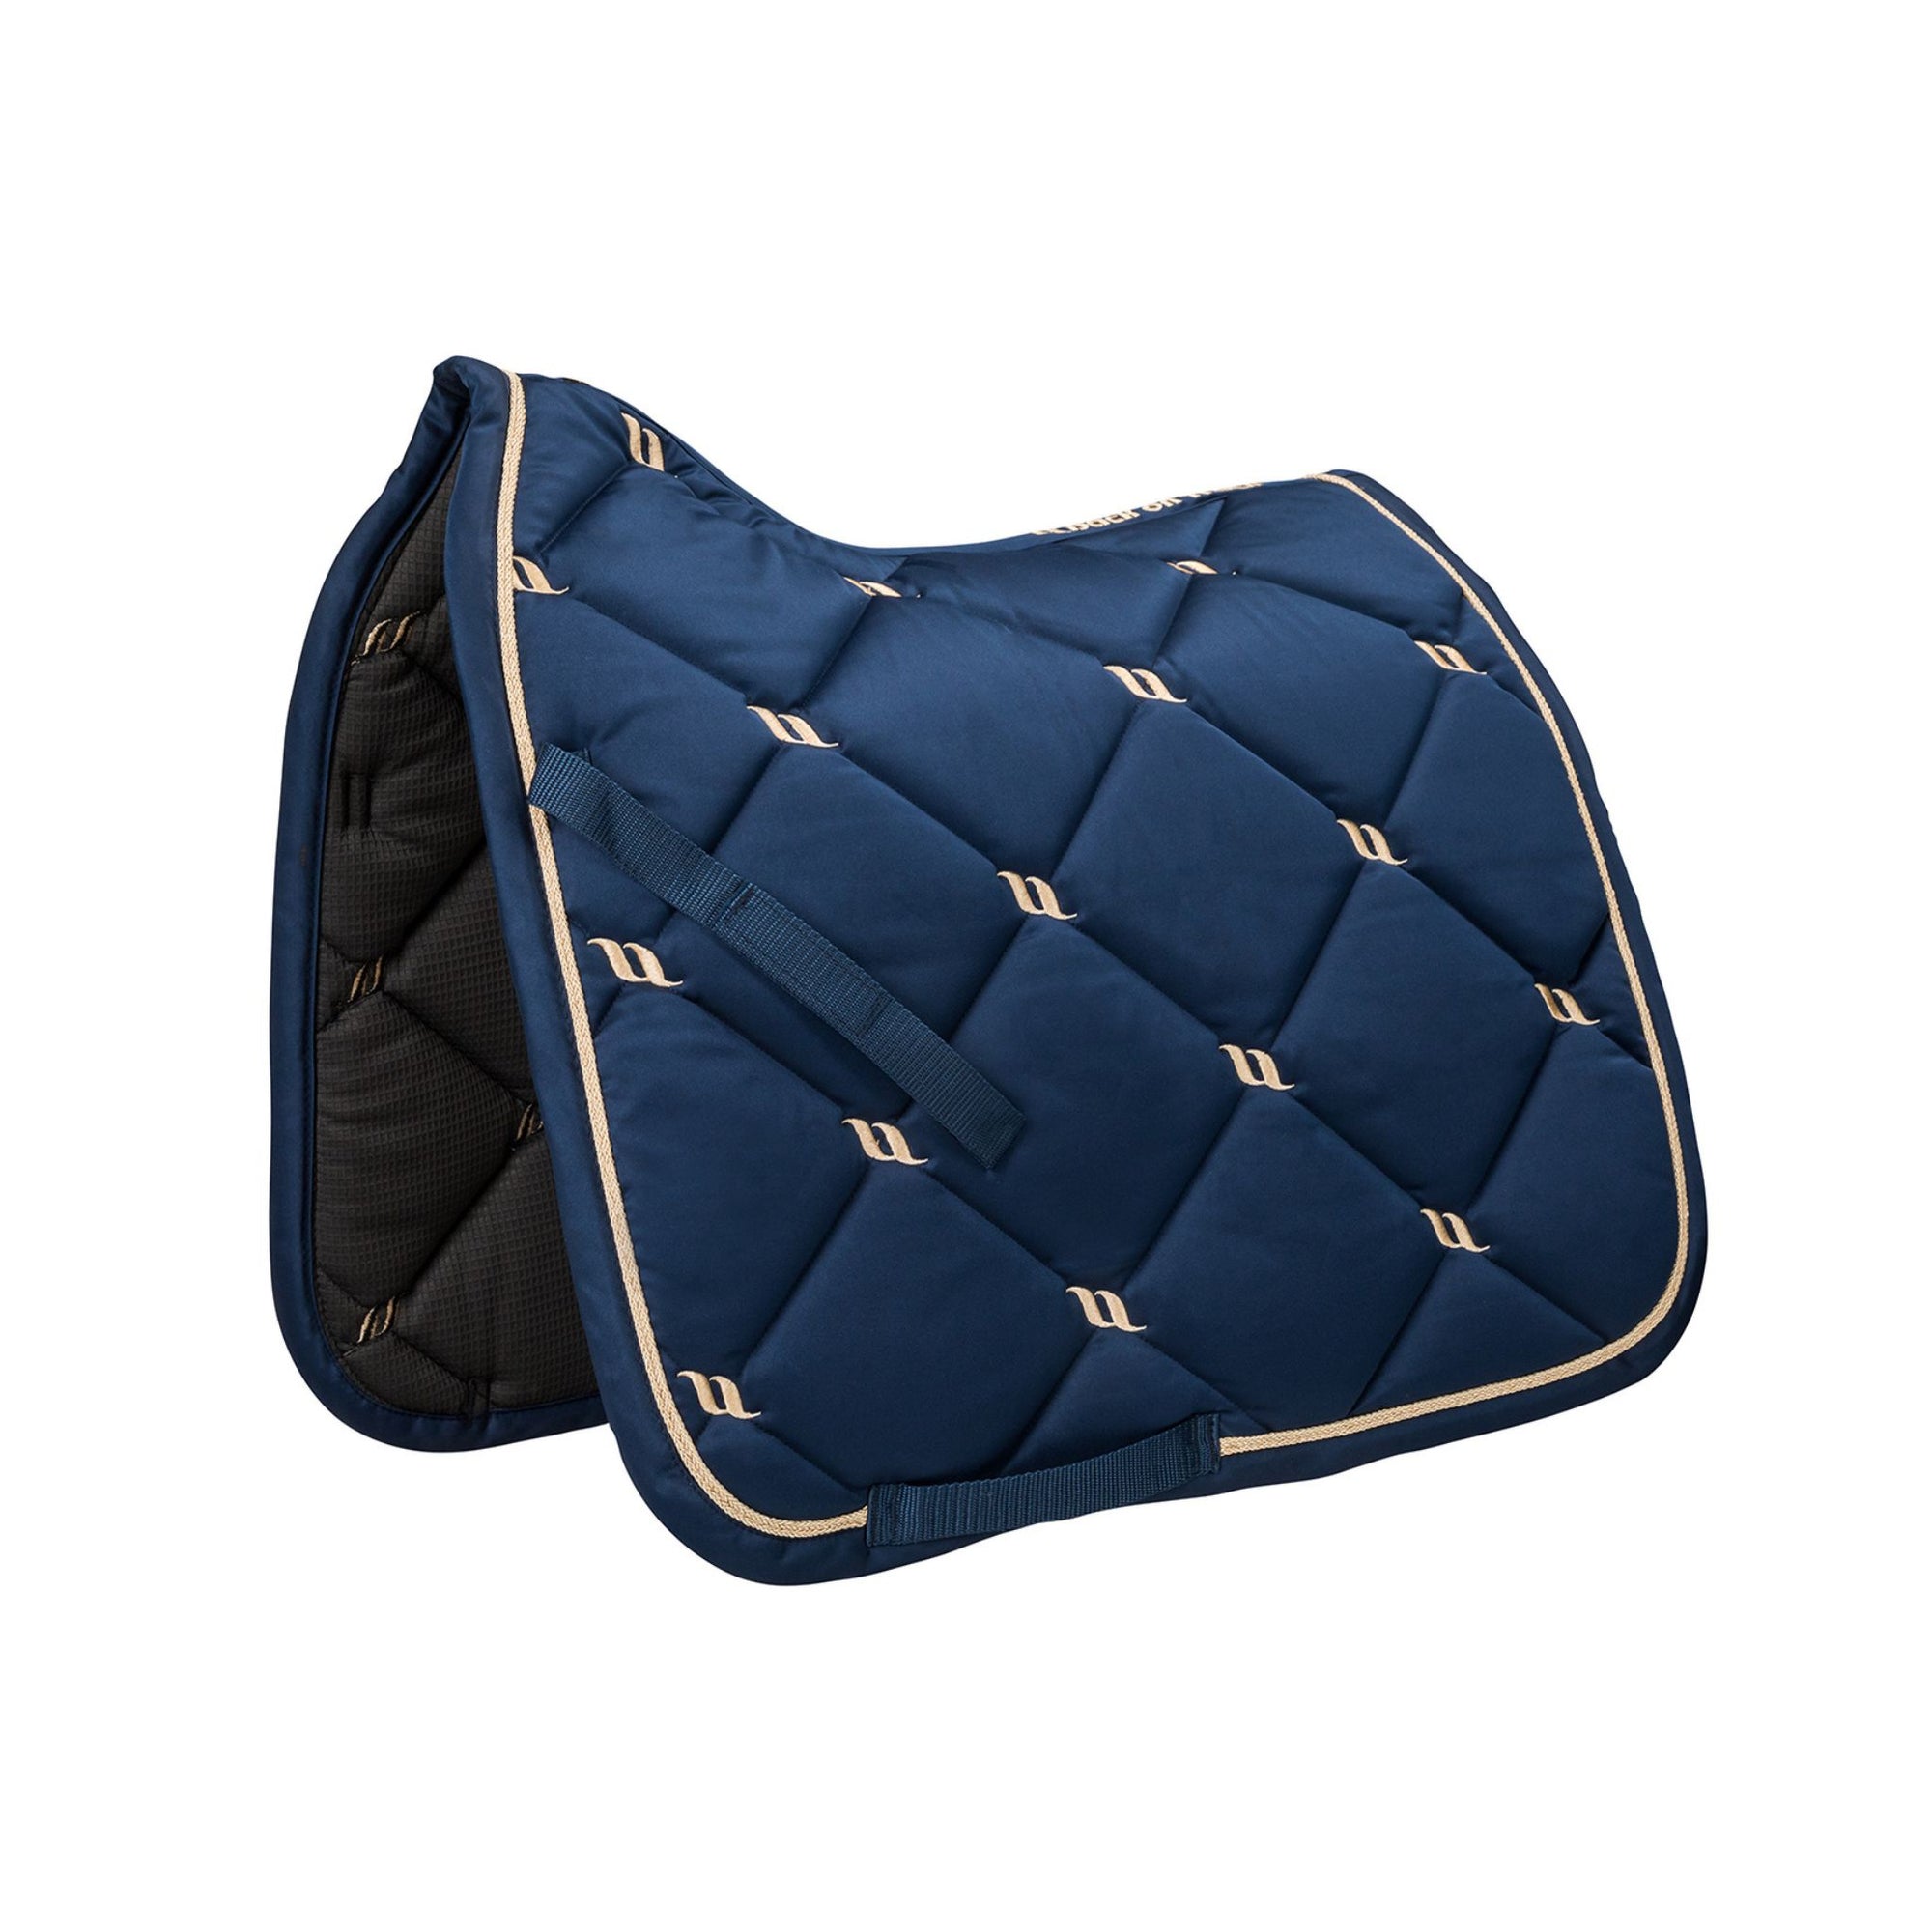 Dressage saddle pad with satin finish and gold details in olive.